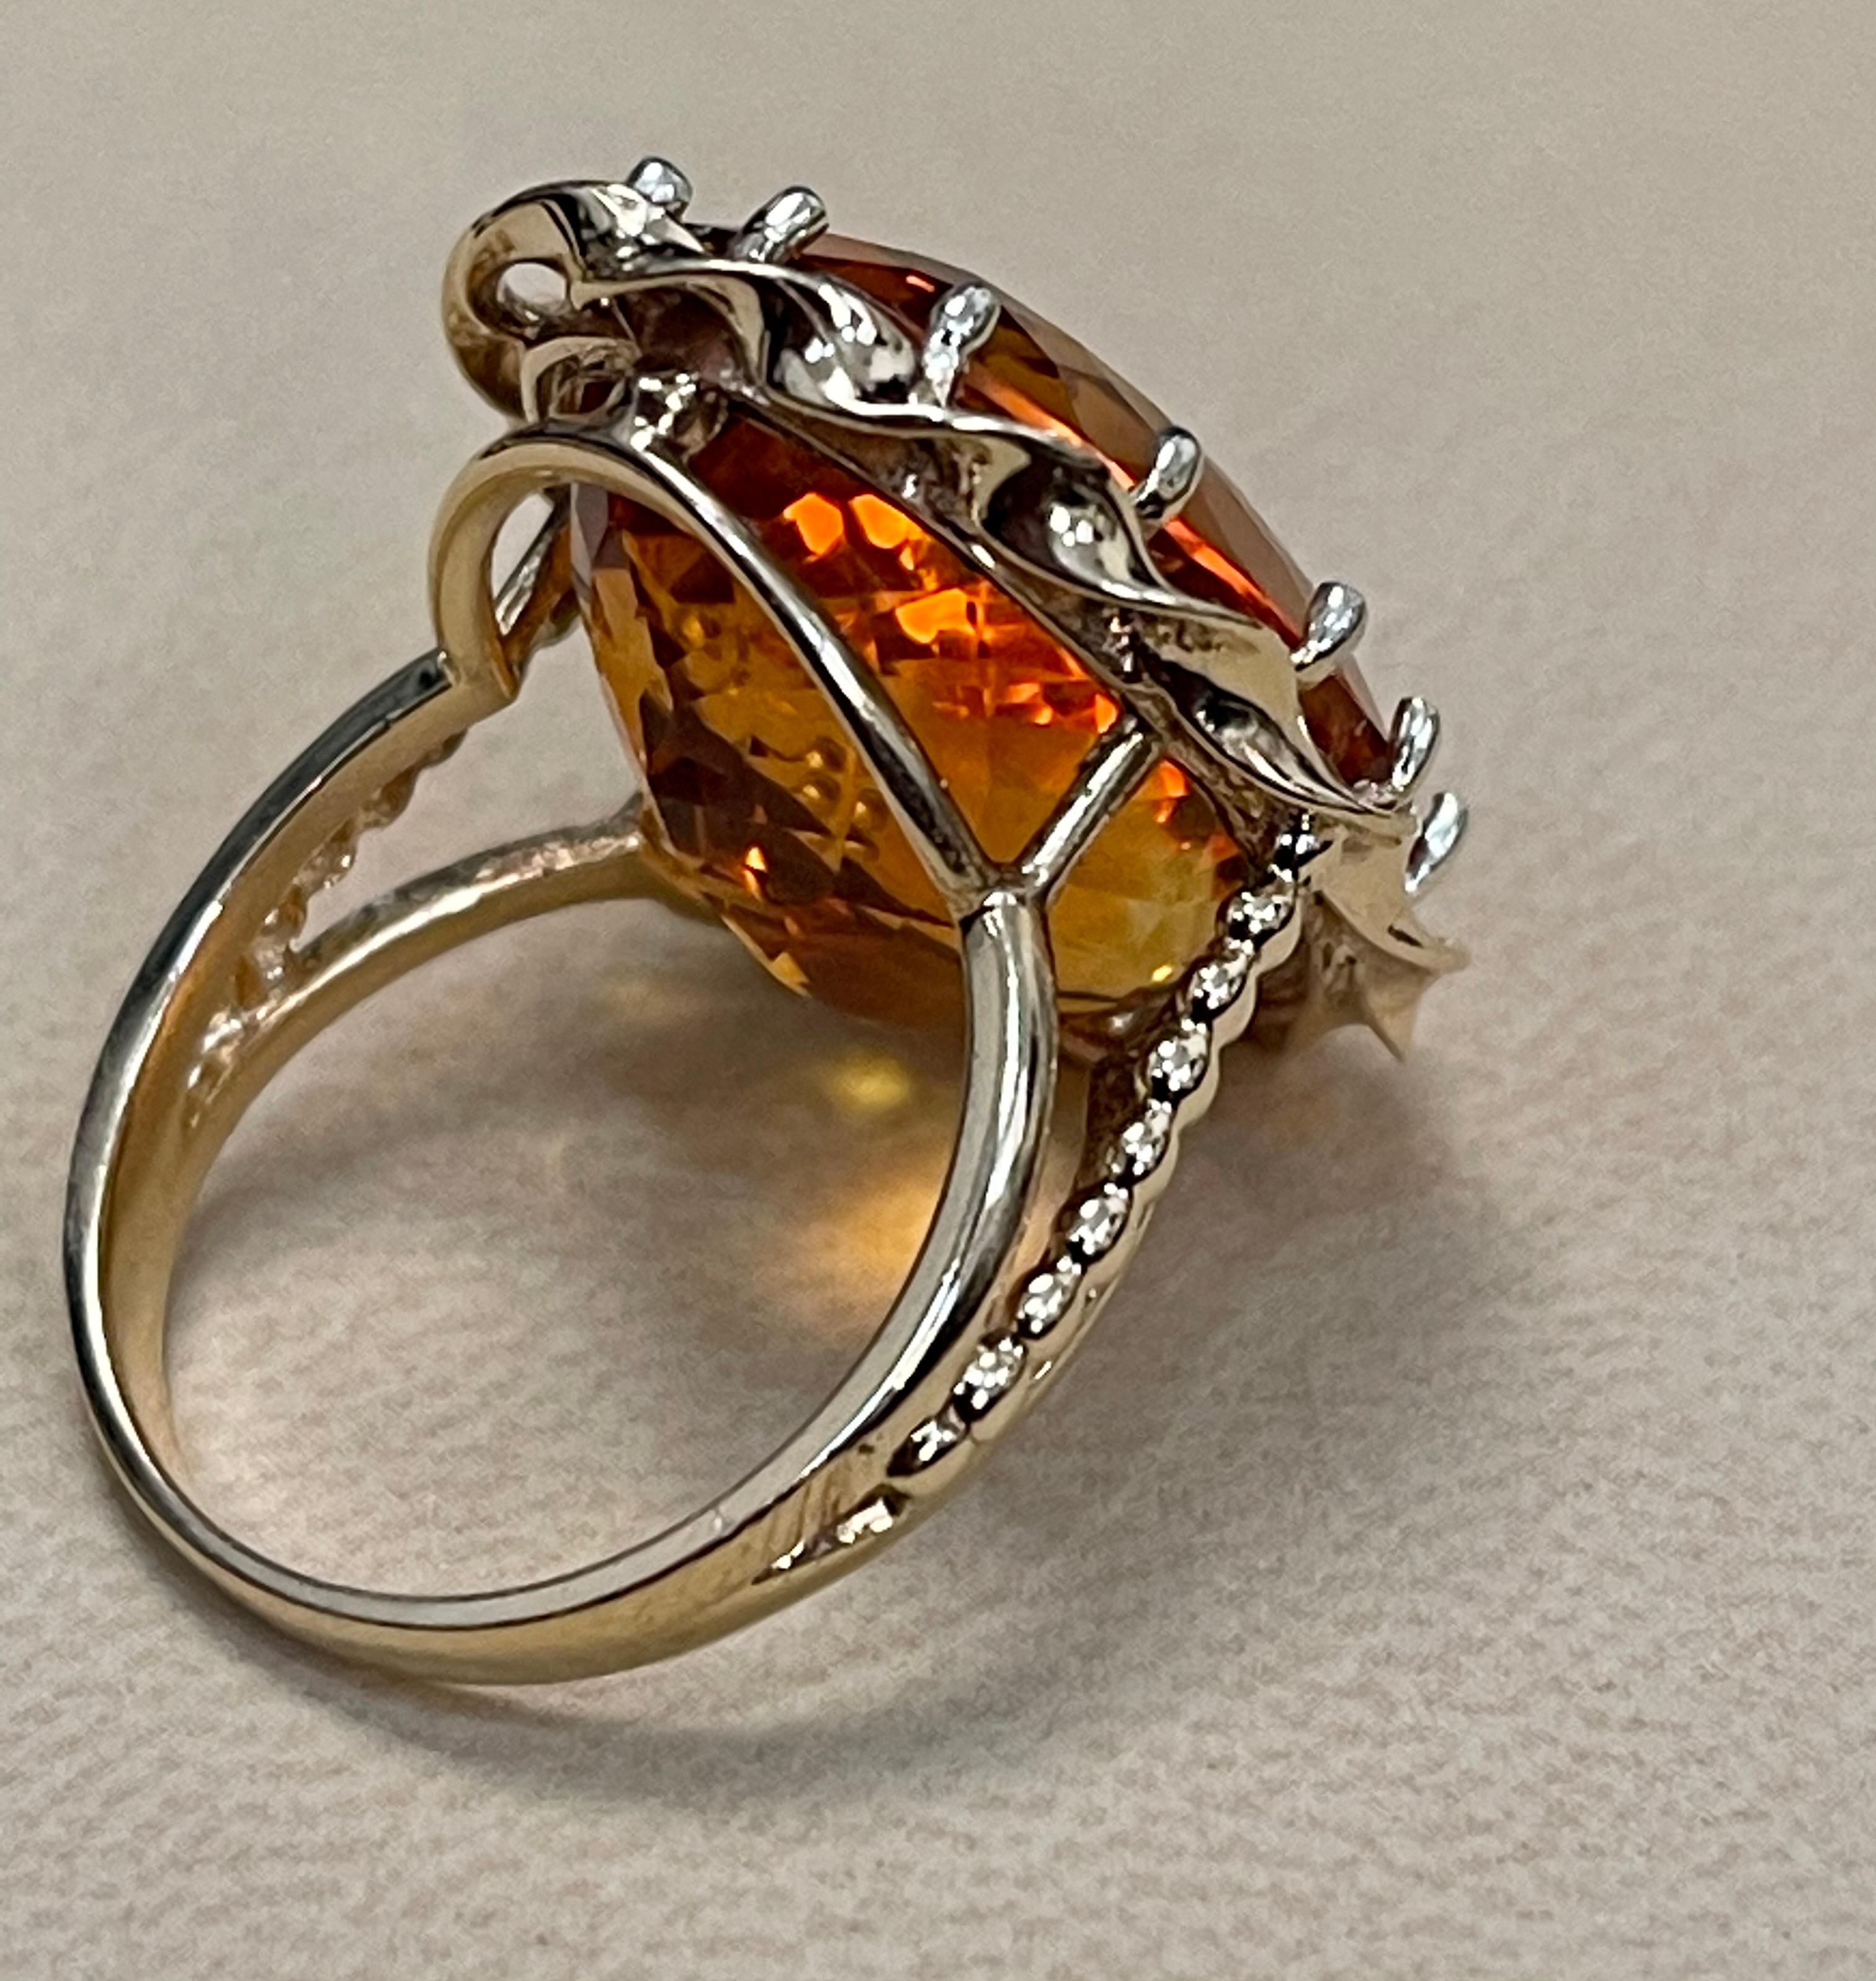 Women's 32 Carat Natural Oval Citrine Cocktail Ring in 14 Karat Yellow Gold, Estate For Sale